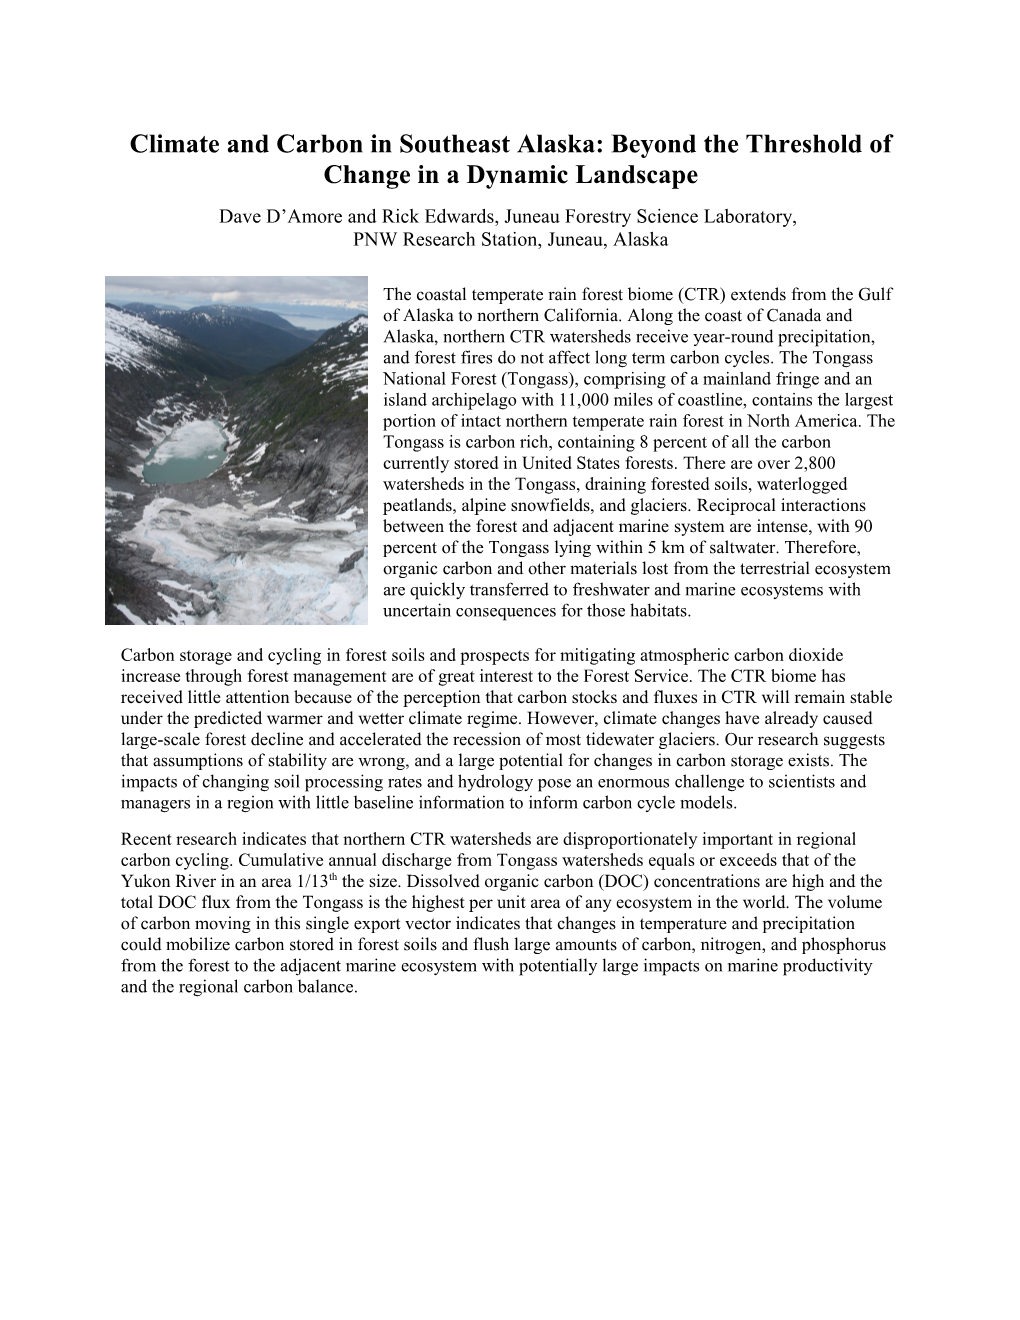 Climate and Carbon Cycles in Southeast Alaska: Beyond the Threshold of Change in a Dynamic